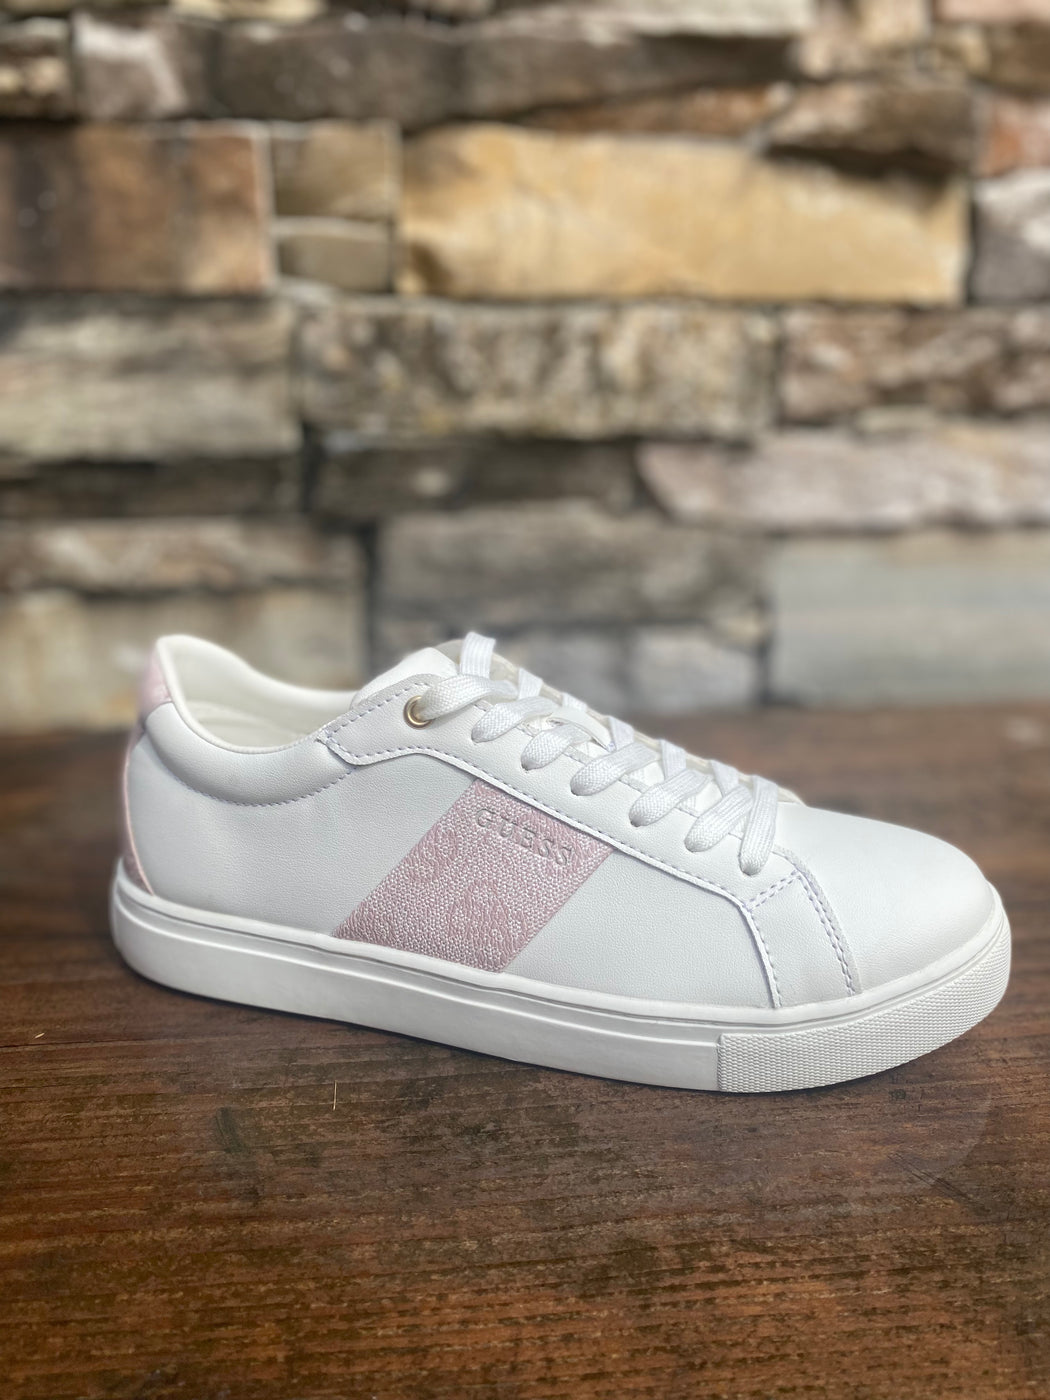 FL7TODELE12 Guess white nude trainers